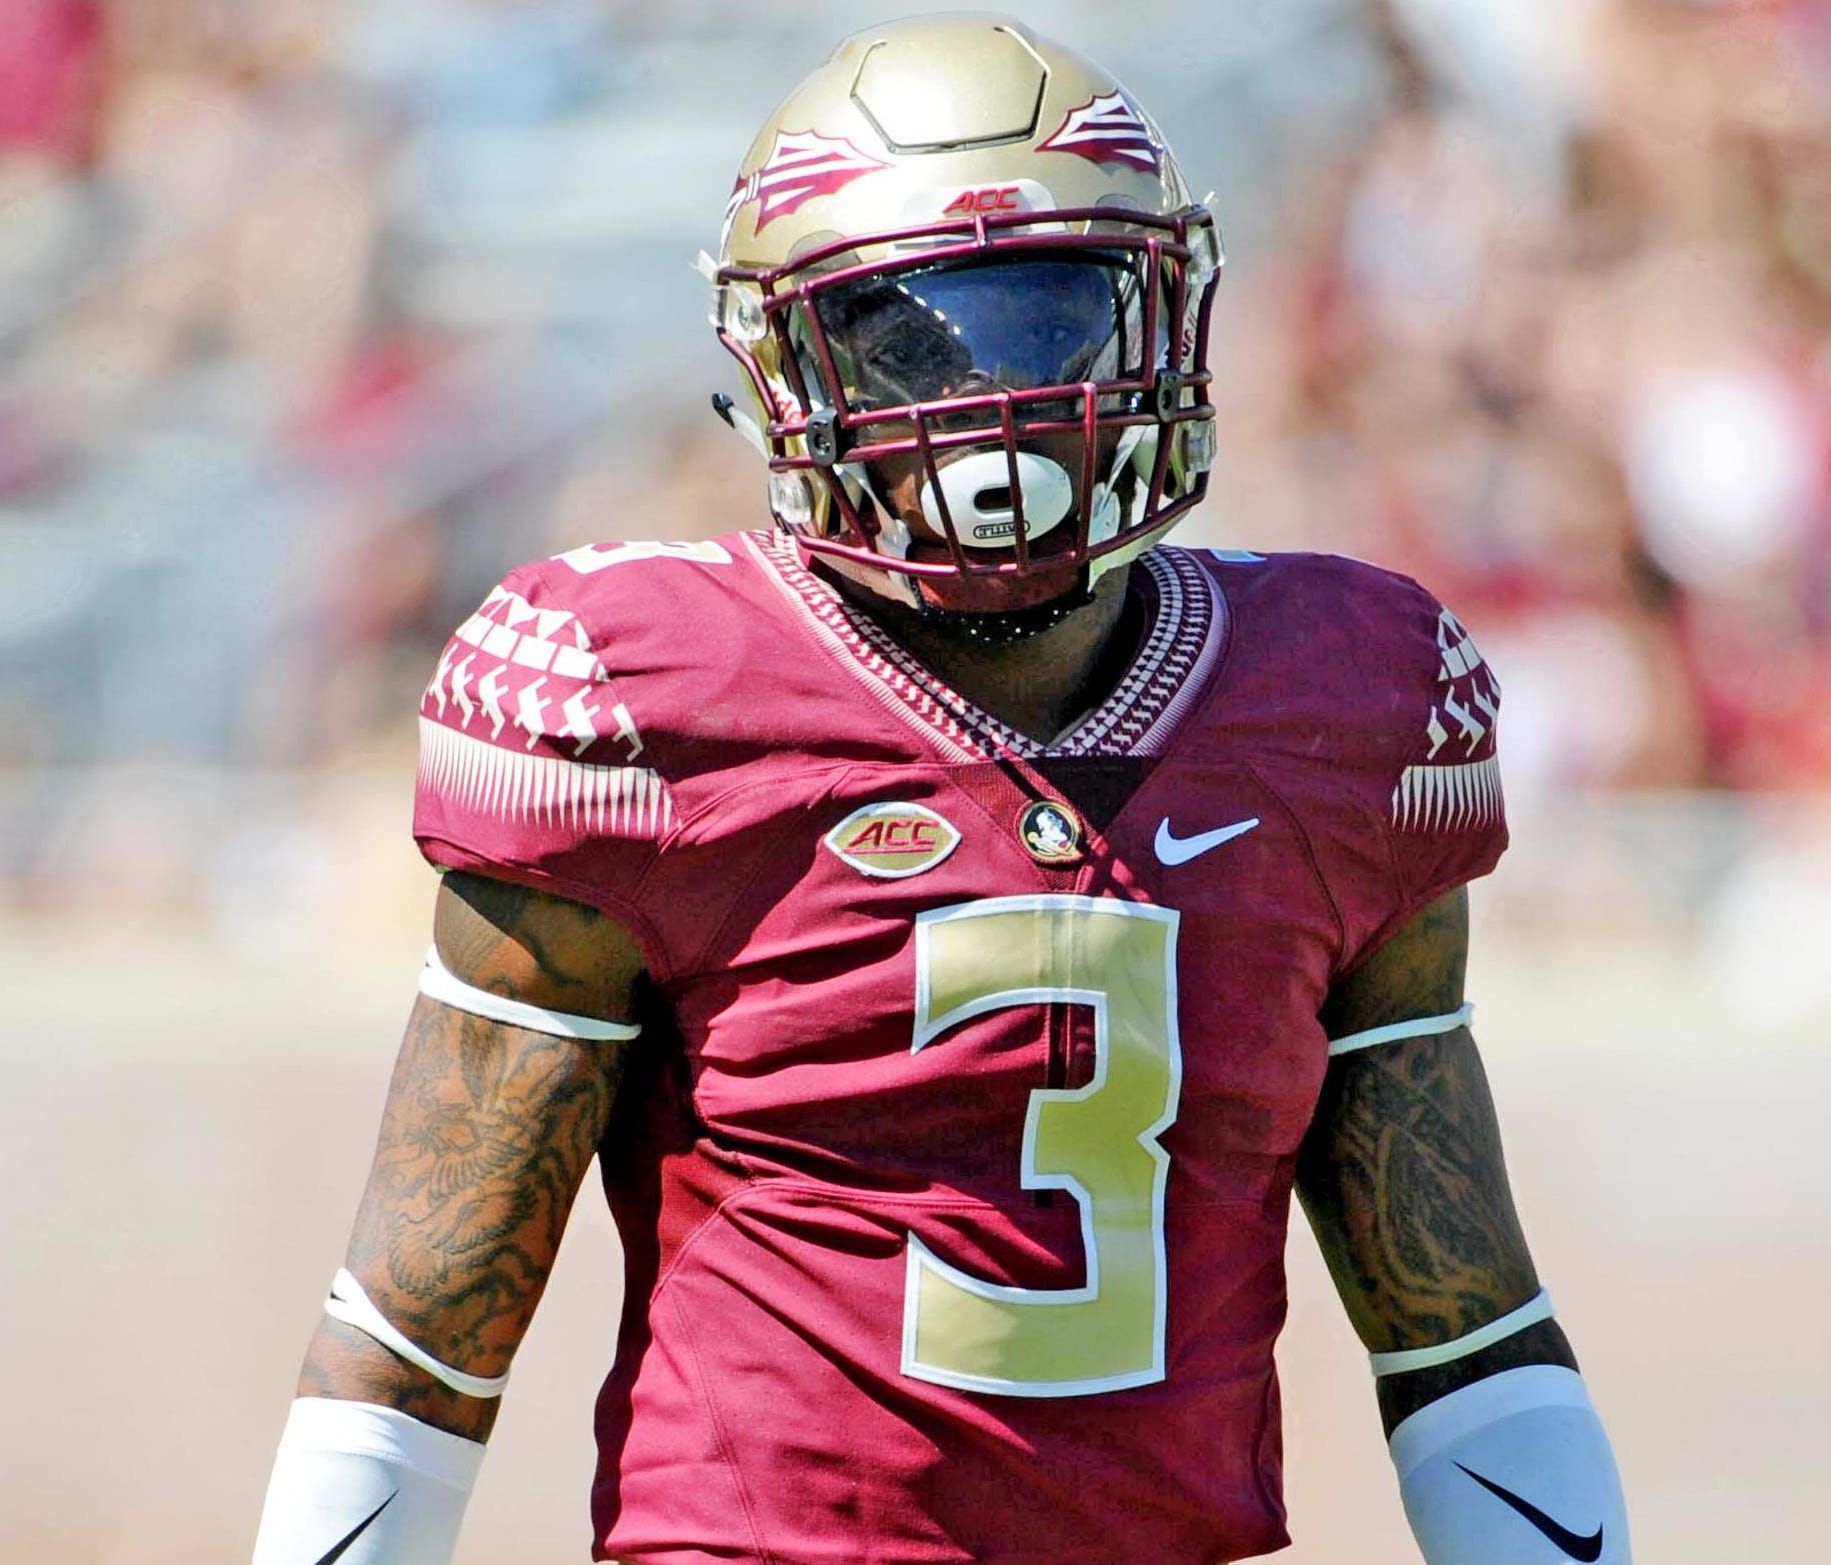 Florida State's Derwin James thinks he'll be a top-10 pick in April's NFL draft.